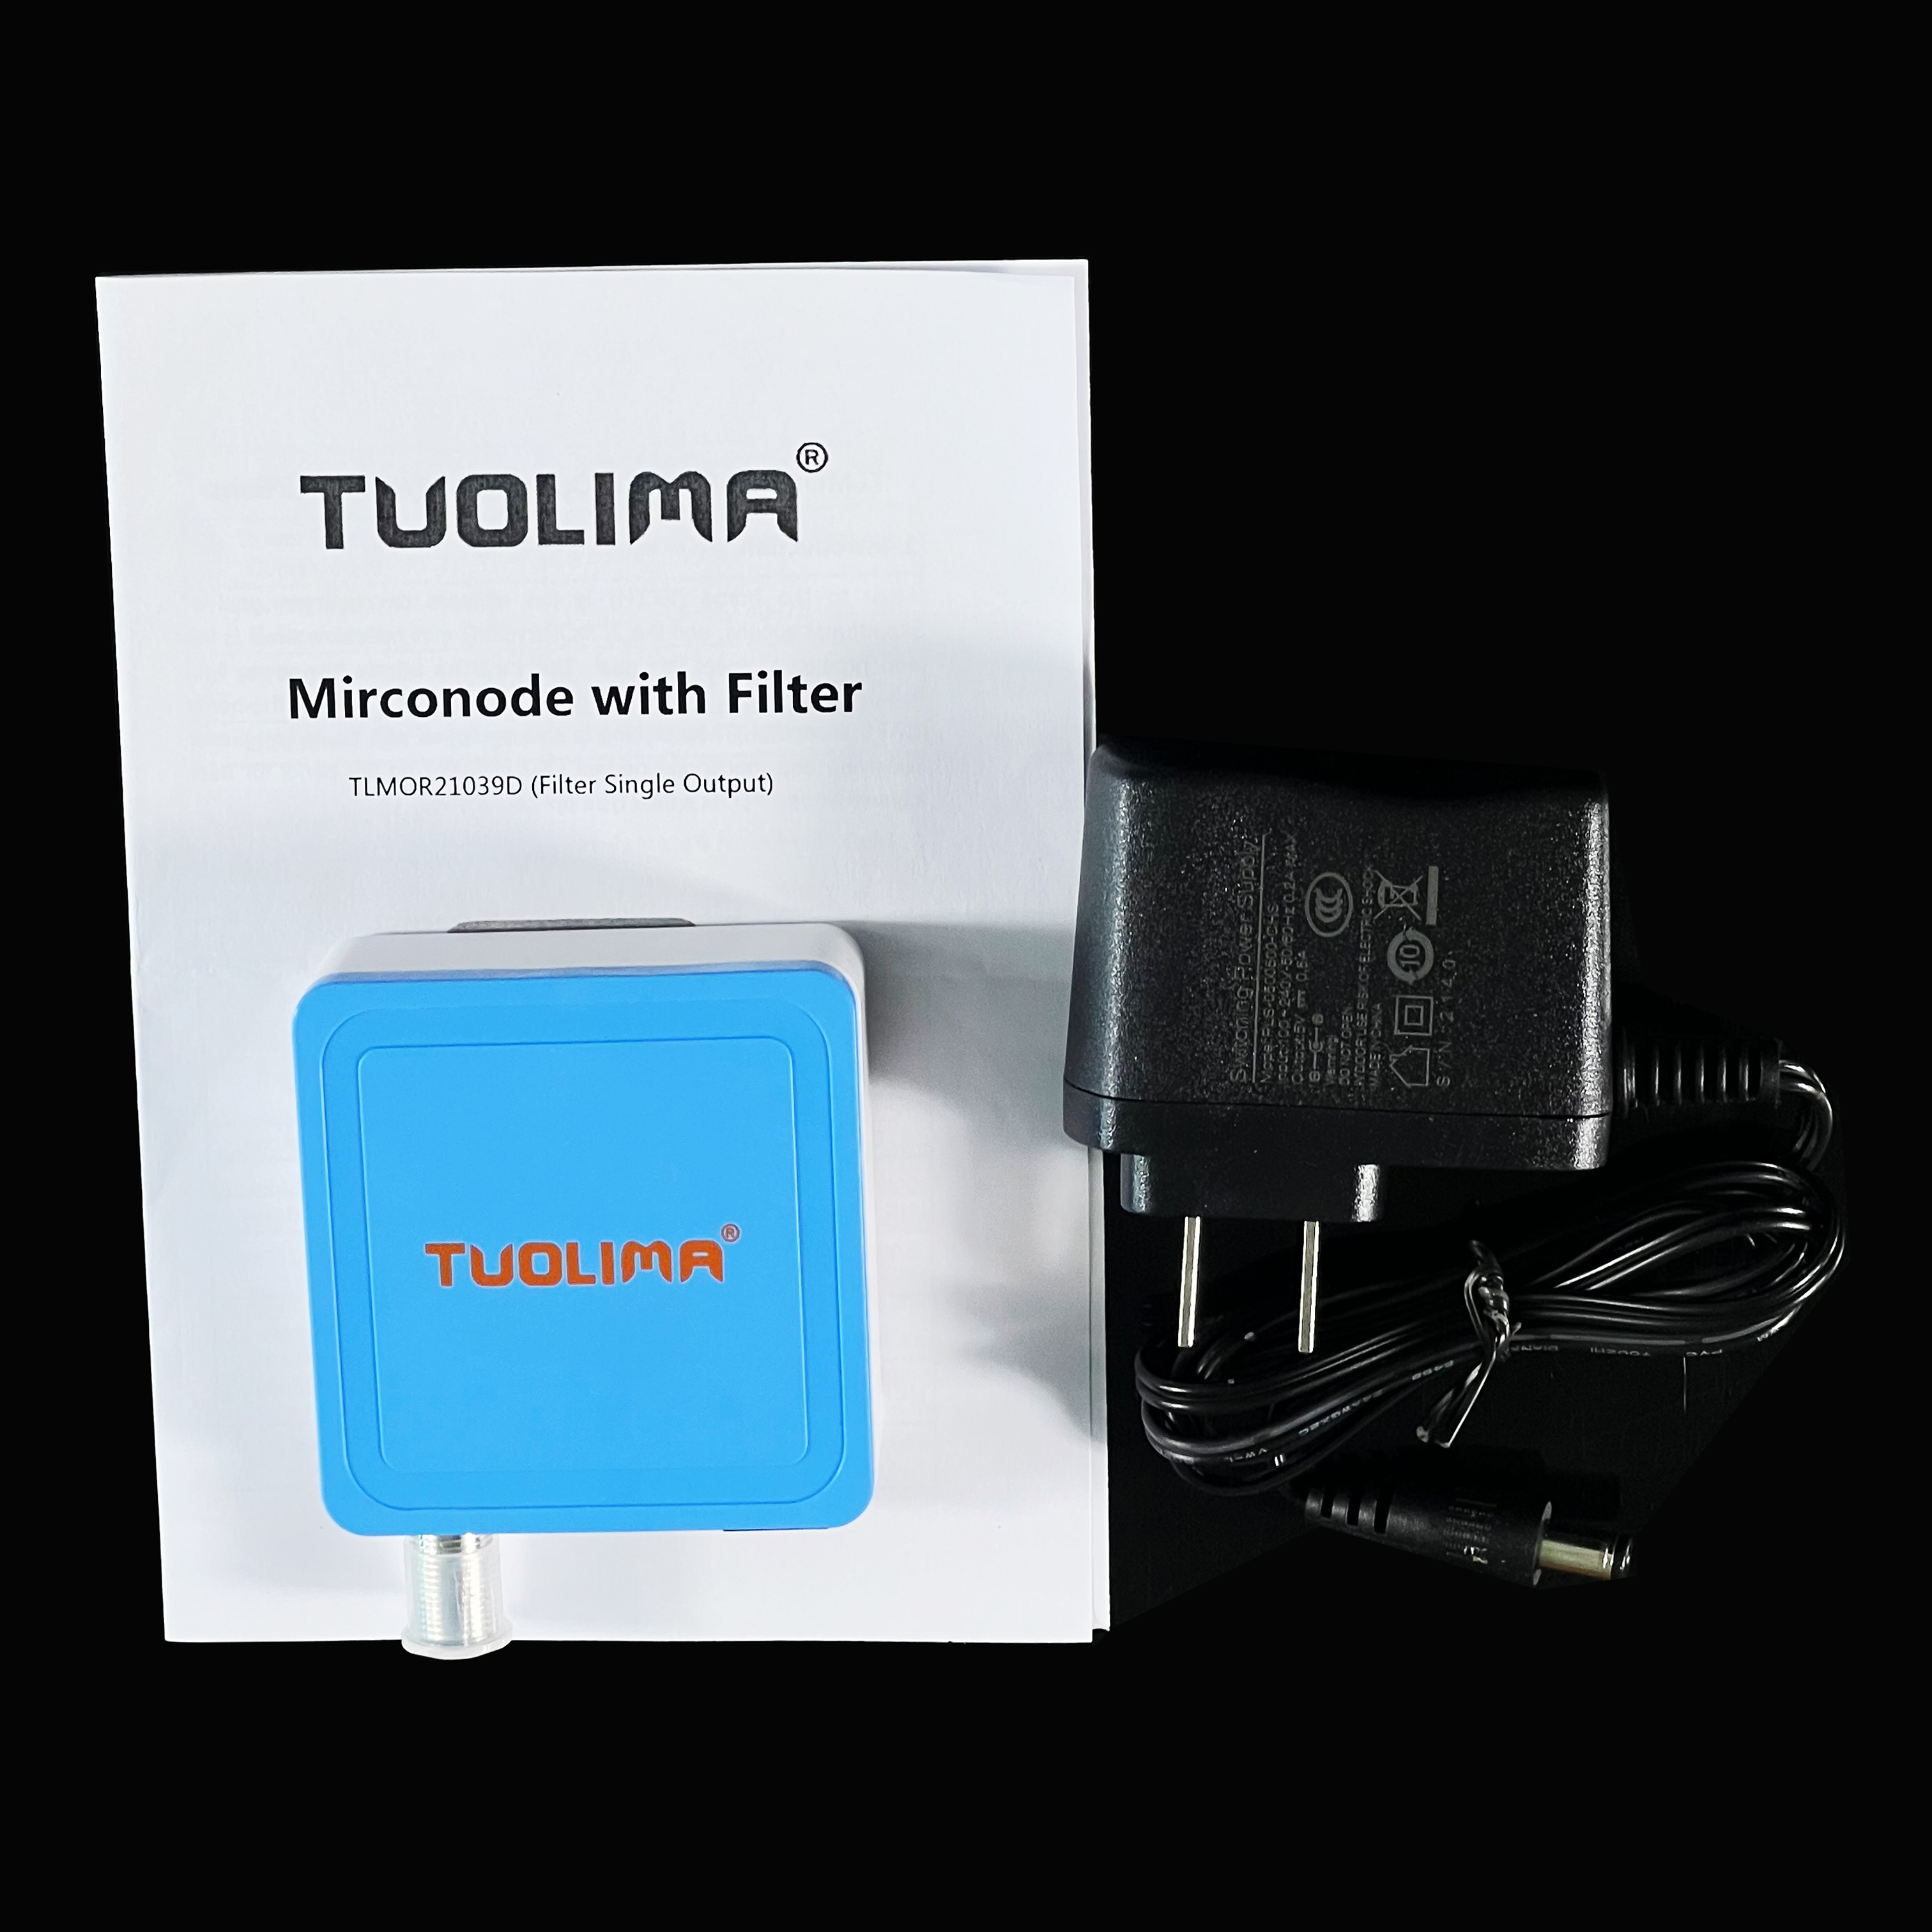 FTTH Optical Receiver with Filter TLMOR21039D 